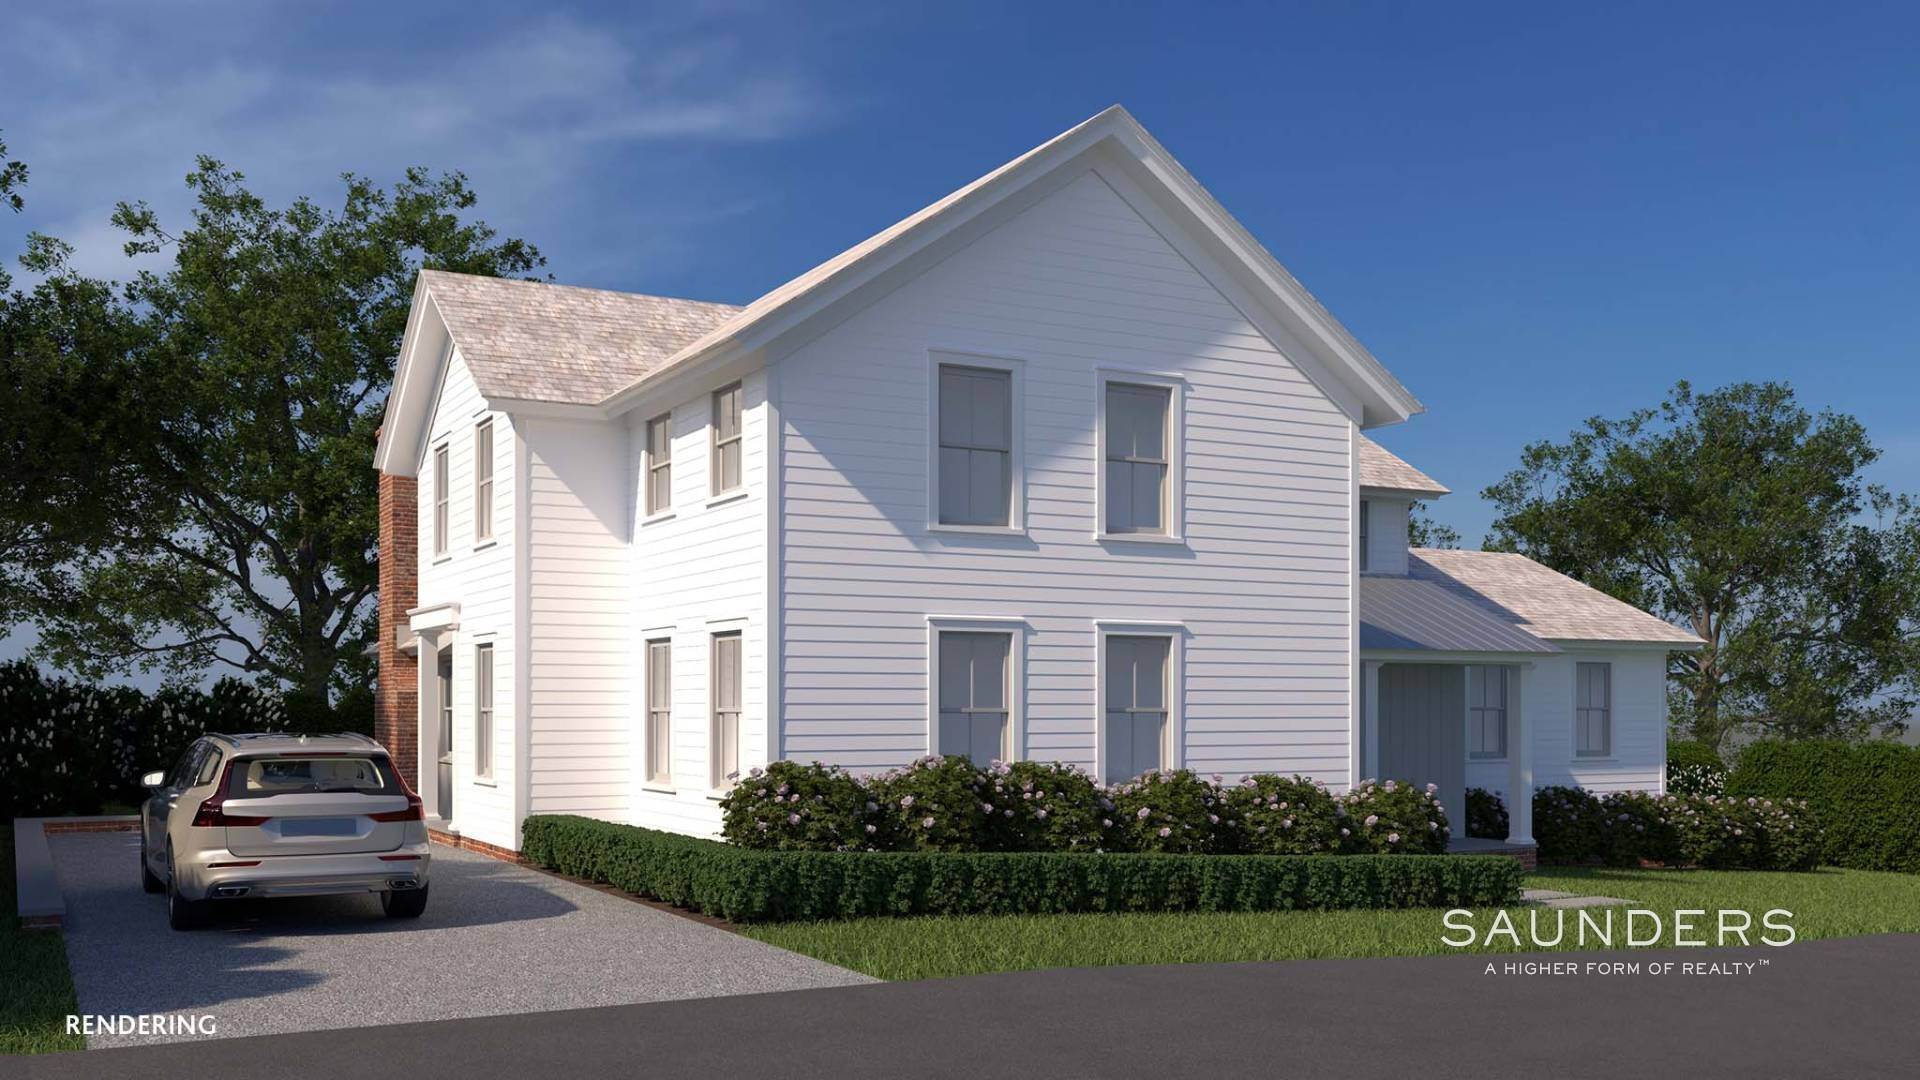 2. Land for Sale at Exciting & Elegant Land Opportunity 25 Liberty Street, Sag Harbor, NY 11963